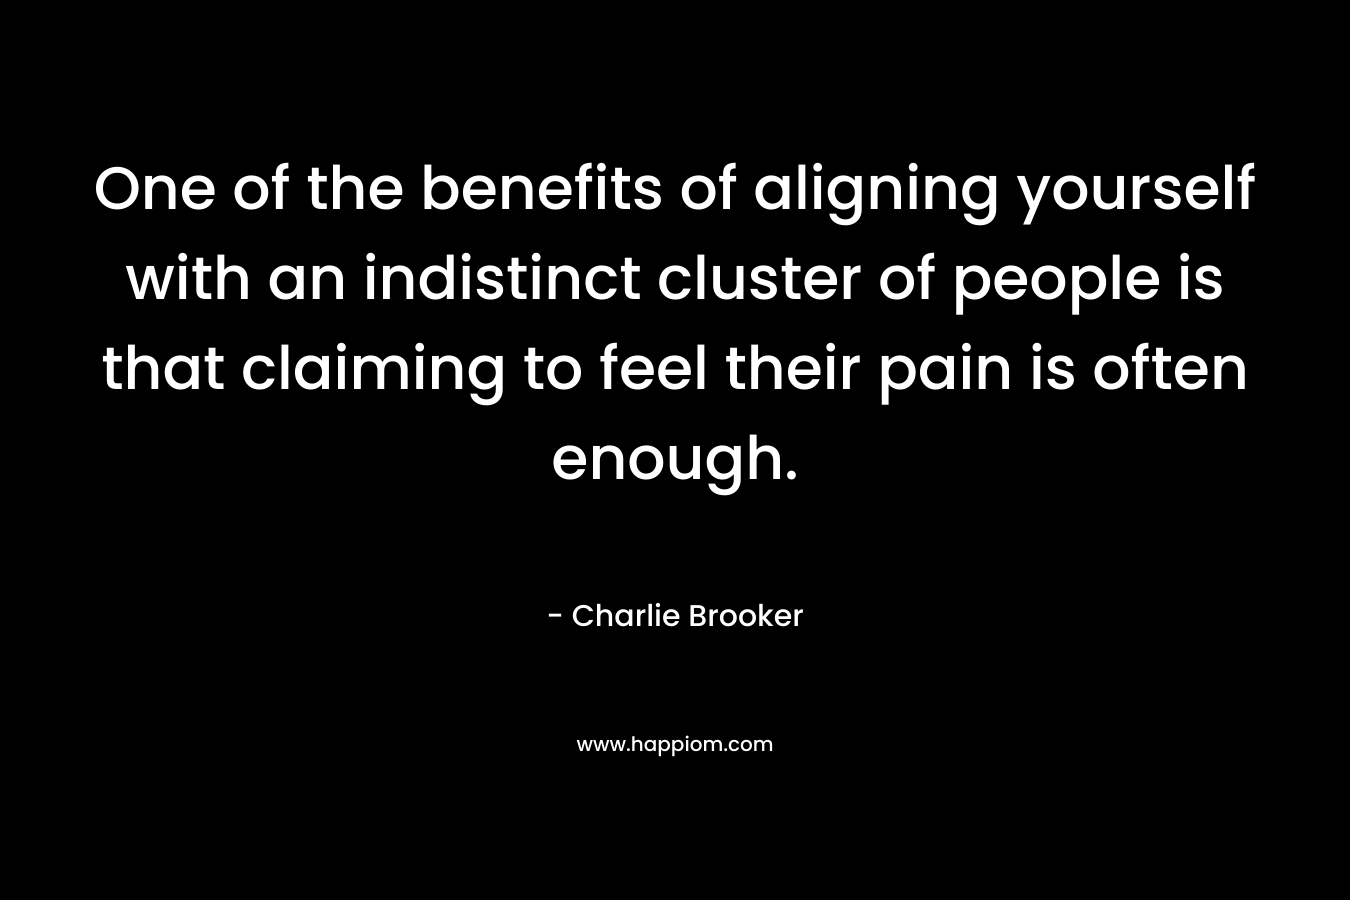 One of the benefits of aligning yourself with an indistinct cluster of people is that claiming to feel their pain is often enough. – Charlie Brooker